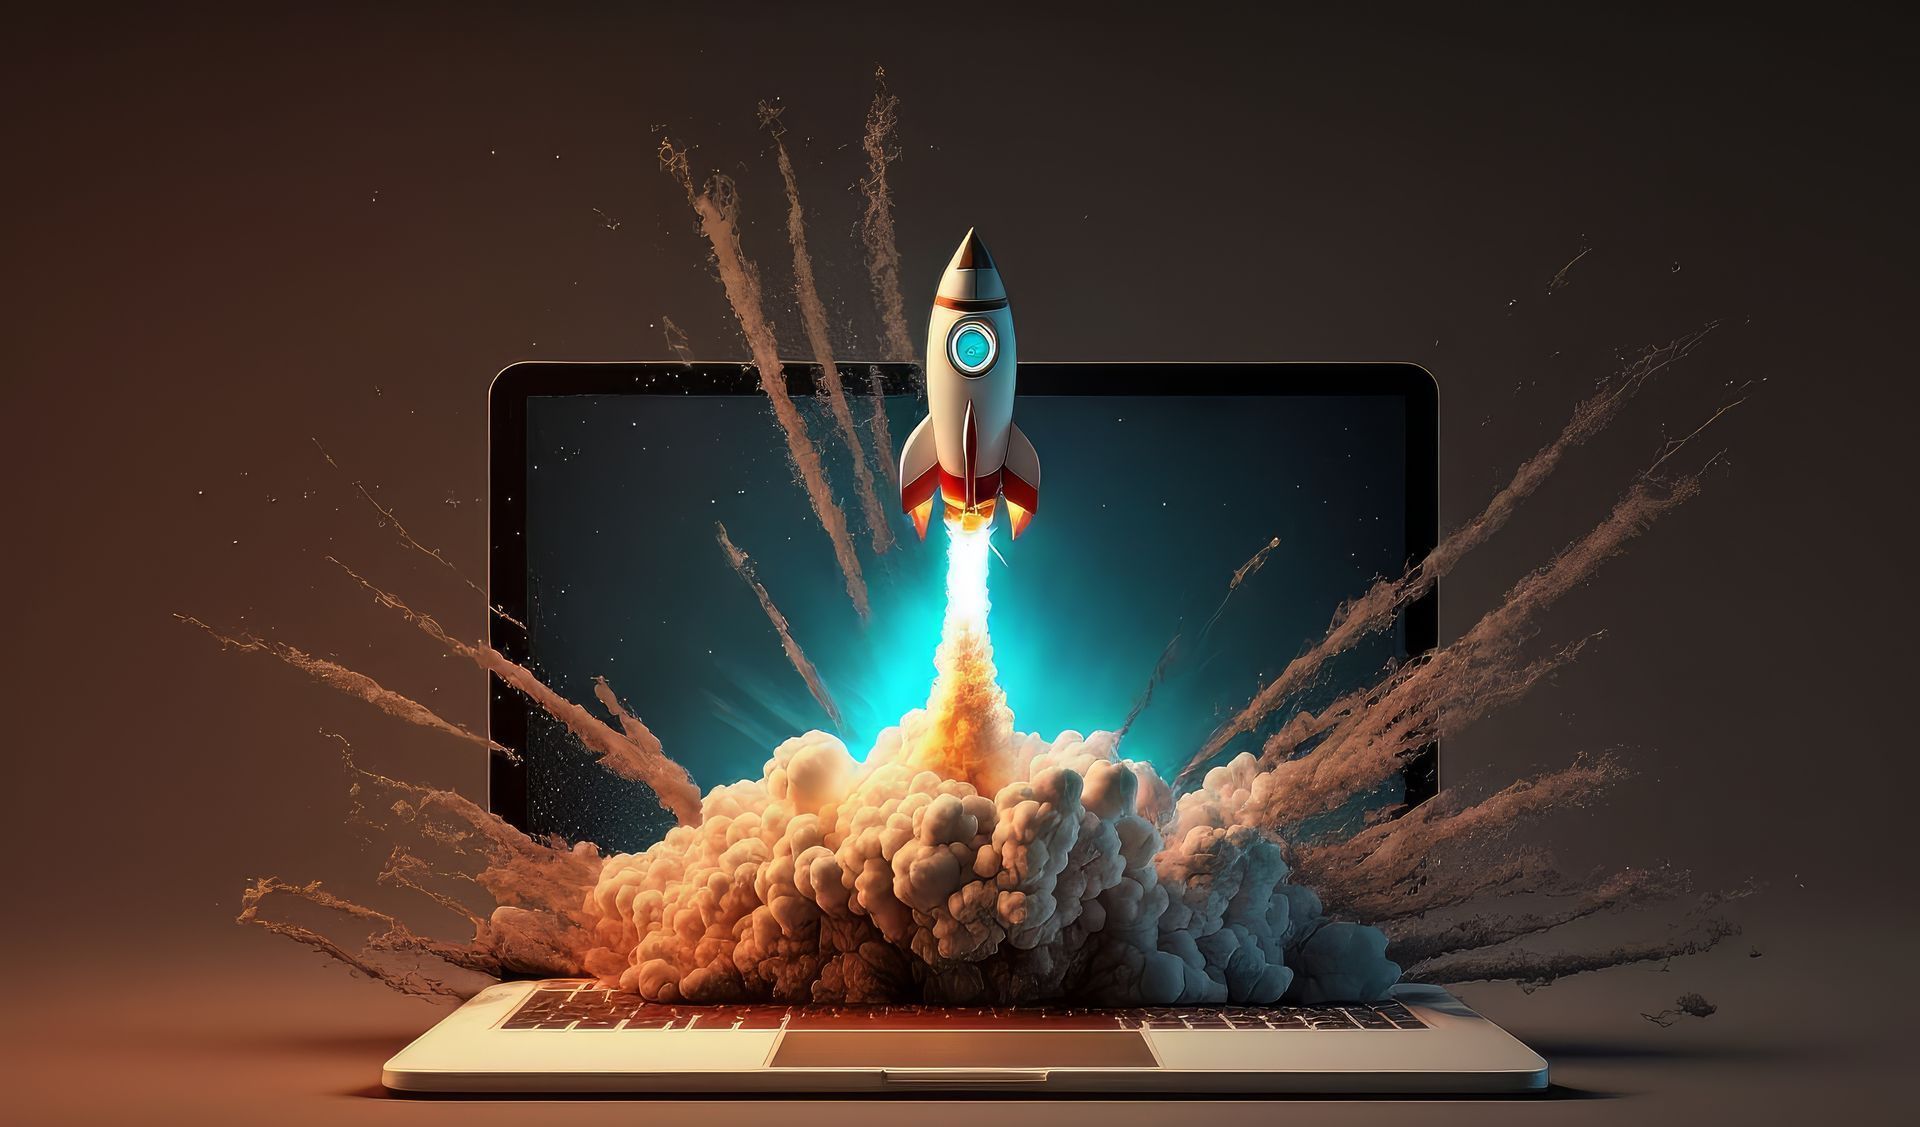 laptop with rocket shown taking off with cloud of smoke